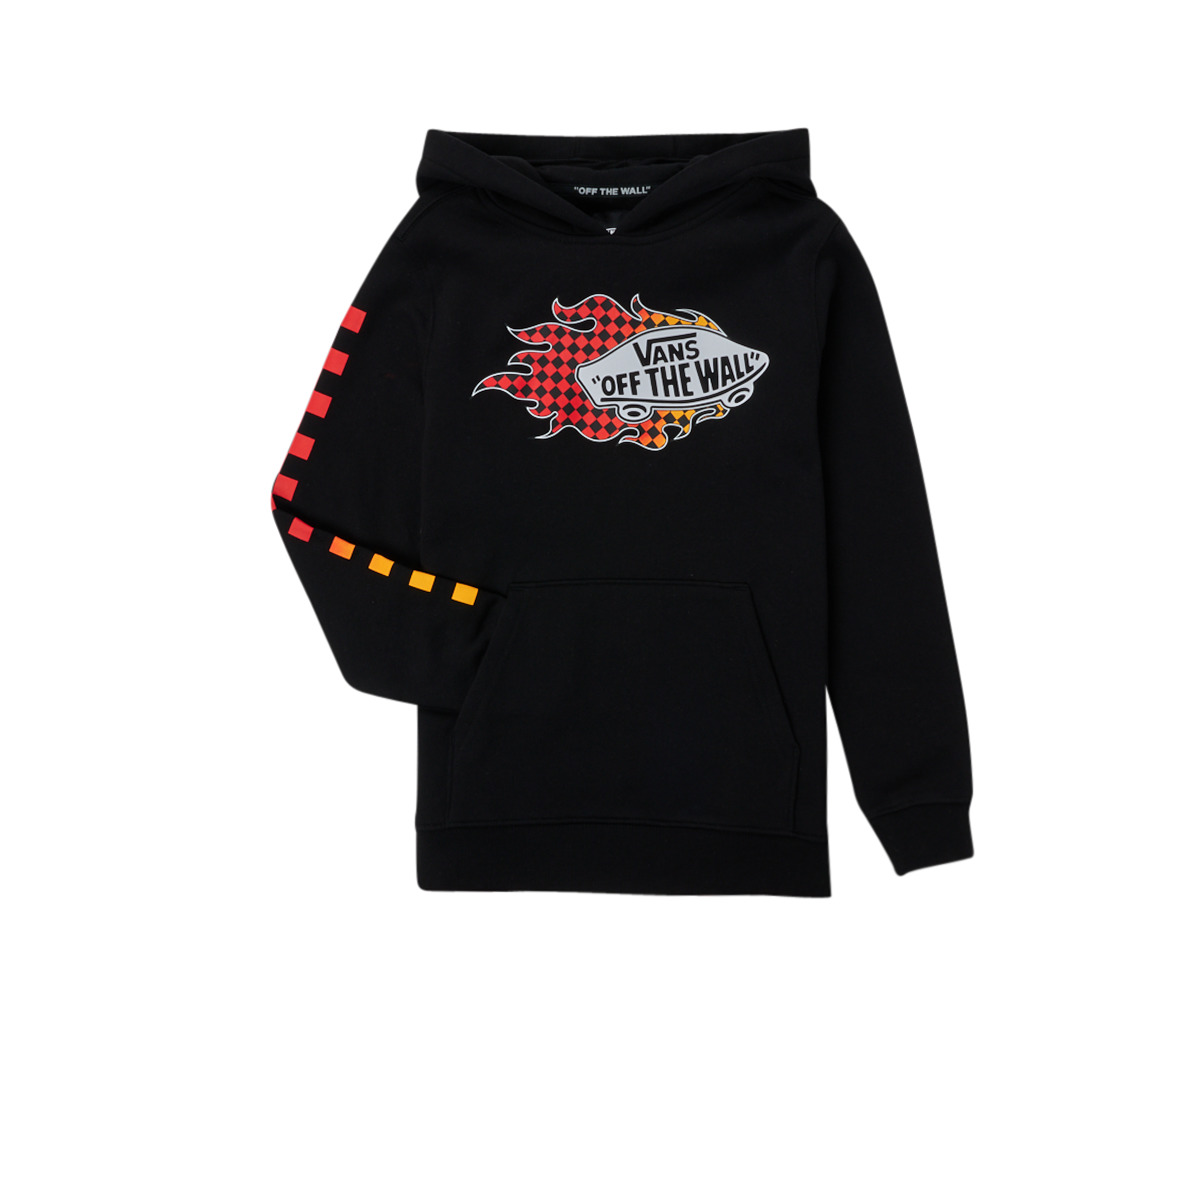 Vans LOGO PO Black - delivery Free - ! Child NET | Clothing Spartoo sweaters